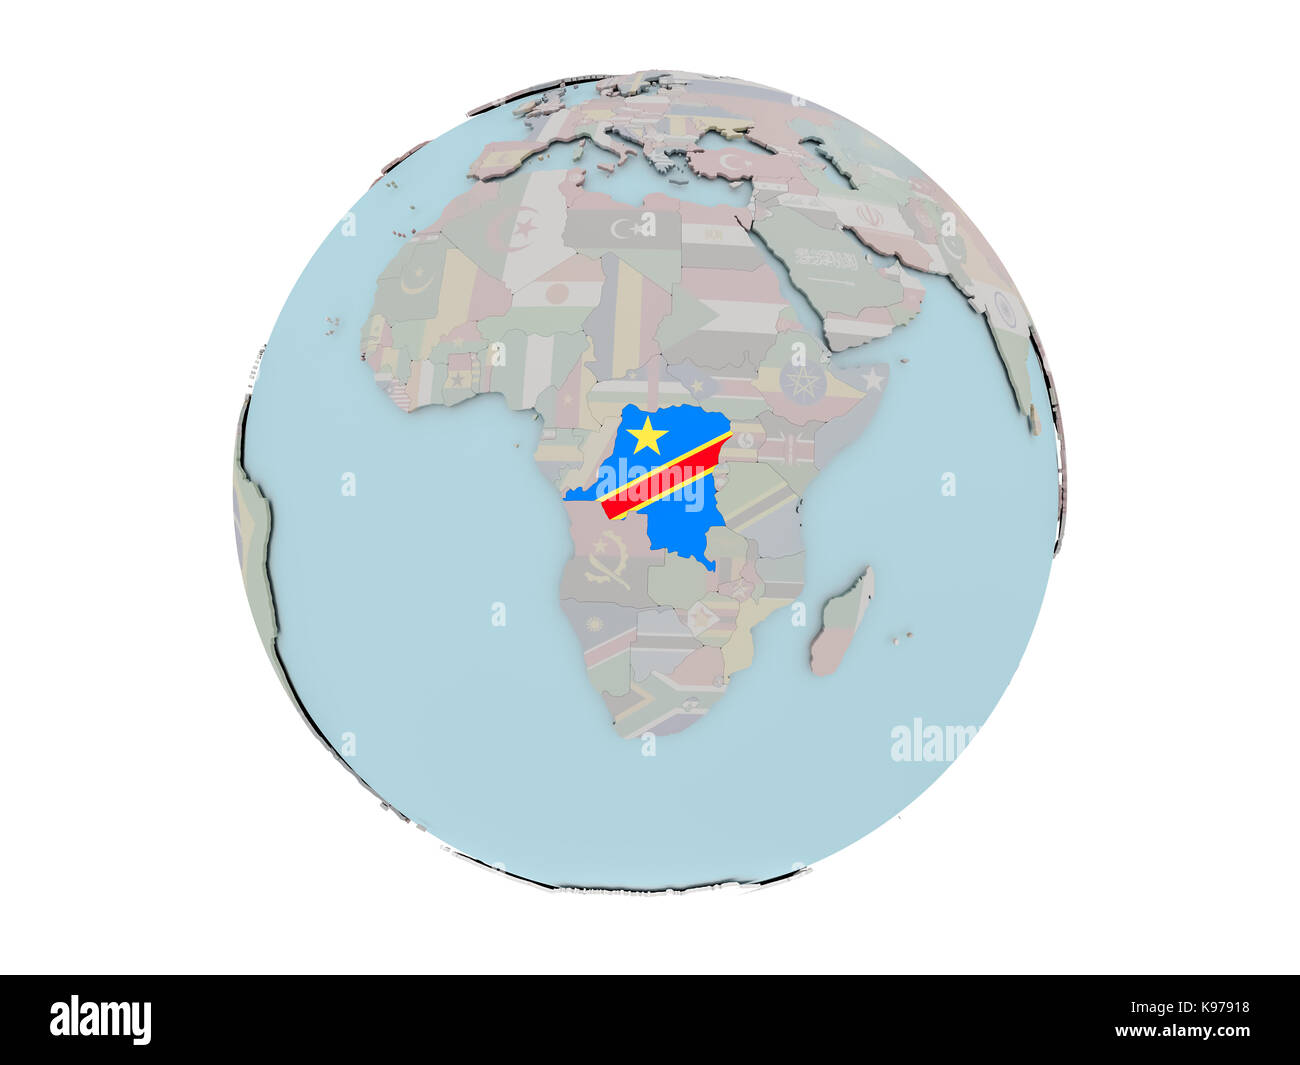 Democratic Republic of Congo on political globe with embedded flags. 3D illustration isolated on white background. Stock Photo